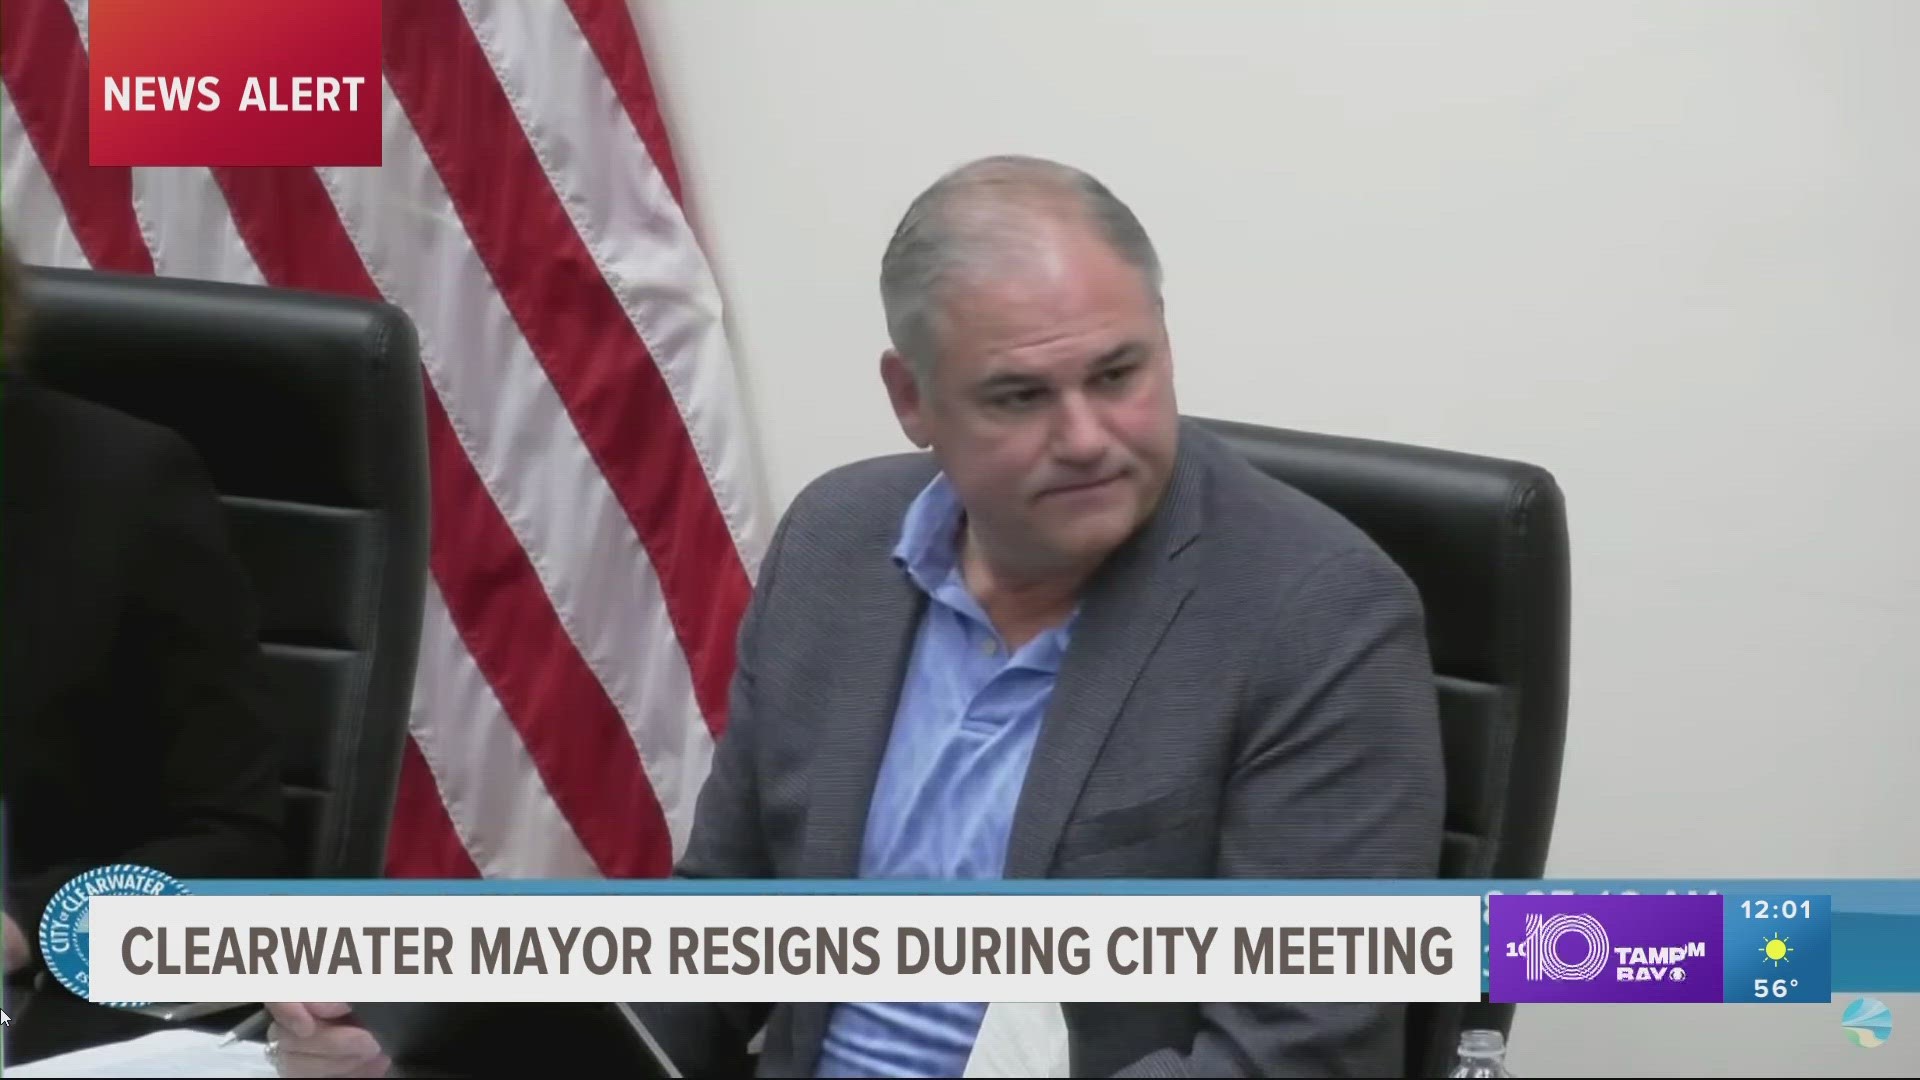 While explaining his decision, the now-former mayor recommended that City Council member Hoyt Hamilton be appointed as interim mayor.